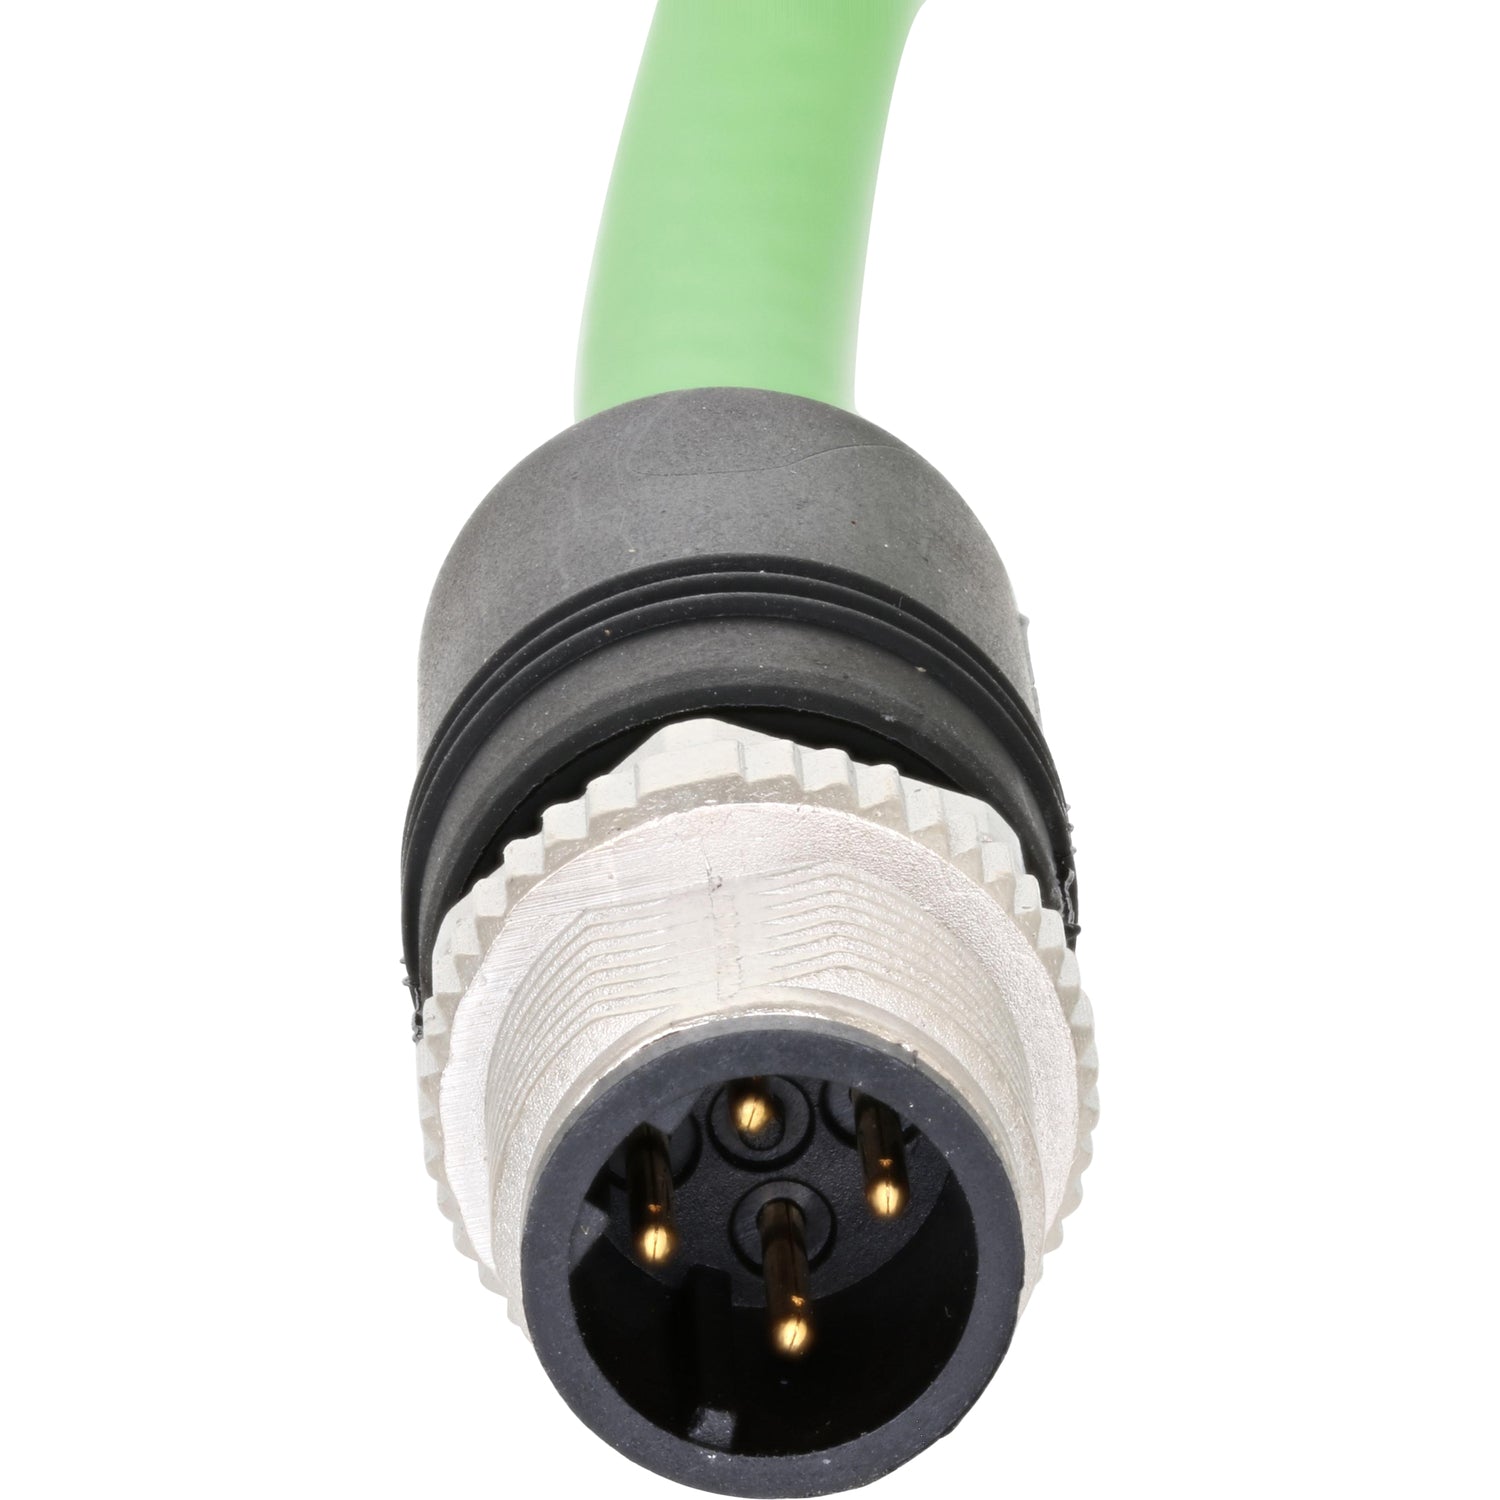 Green connecting cable with nickel-plated, four-pin male connector on white background. 